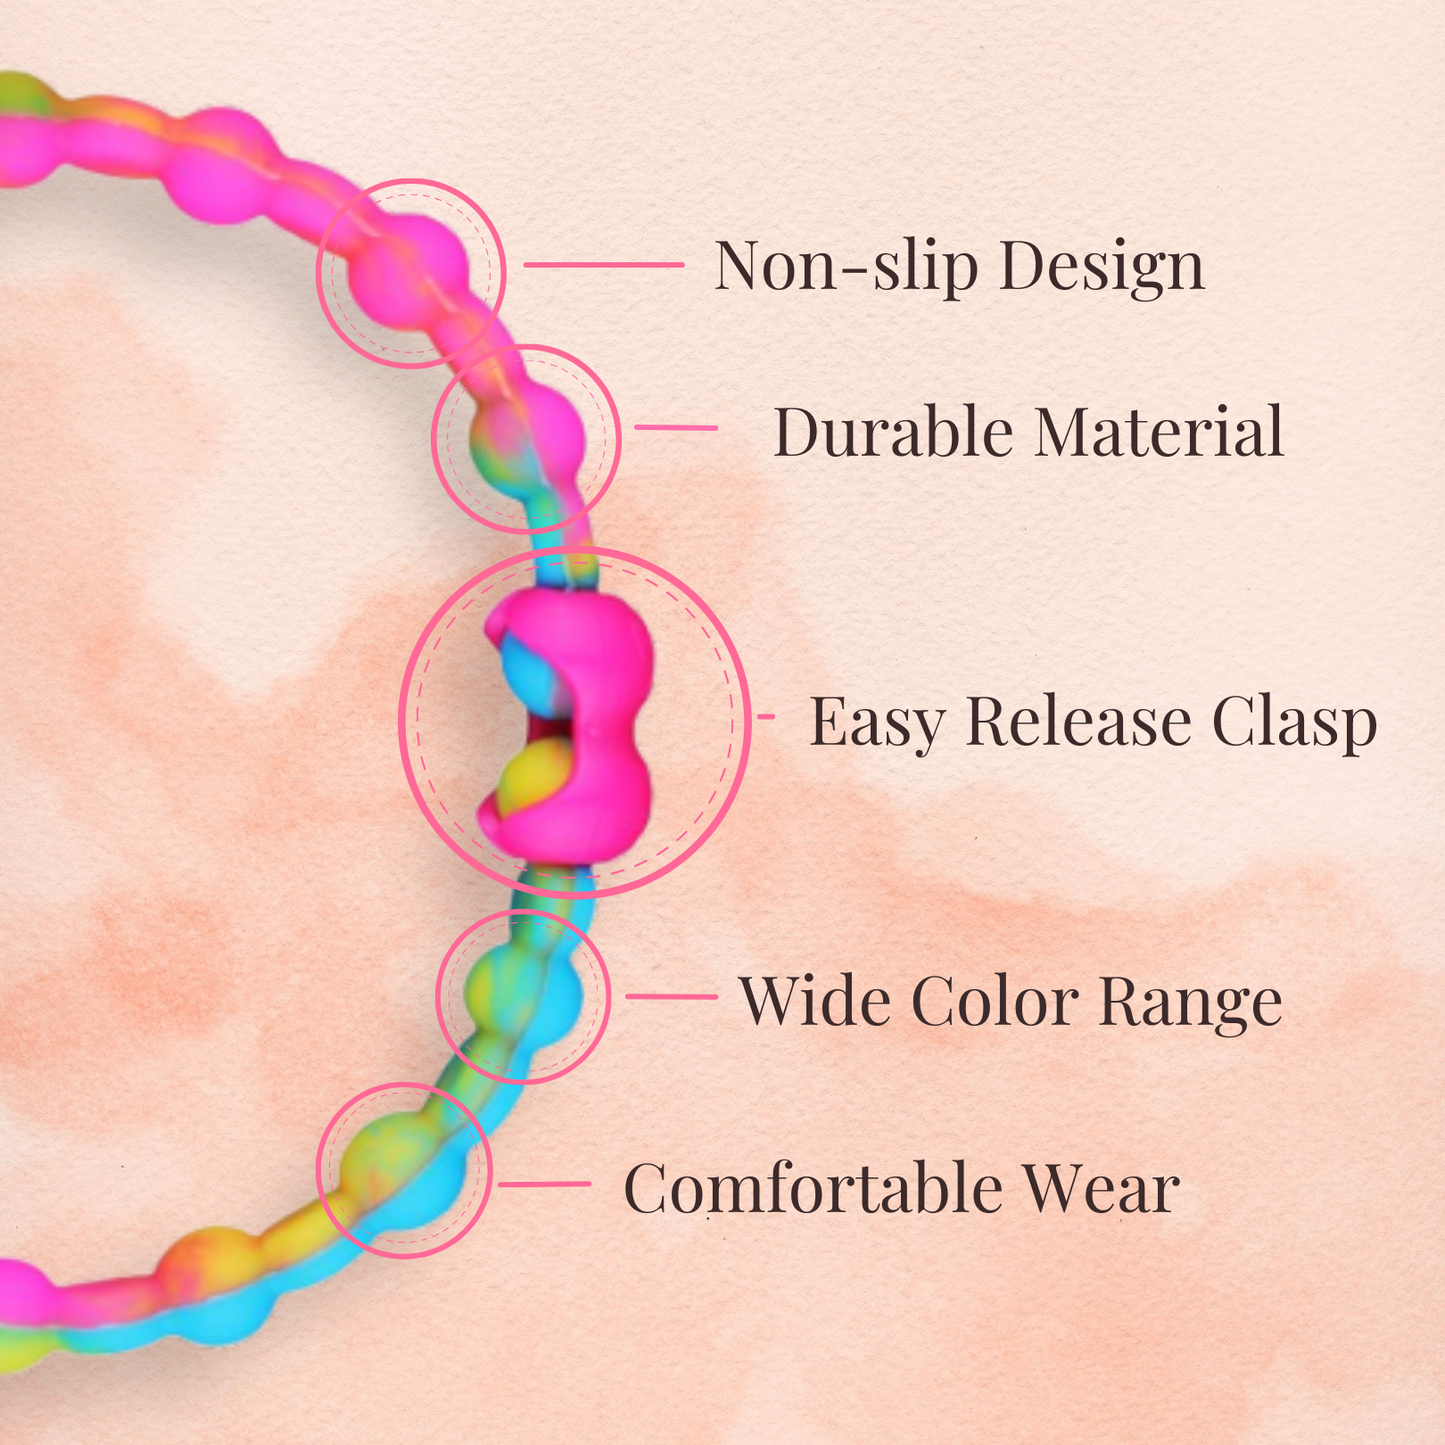 Rainbow Hair Ties (4-Pack) - Add a Splash of Color to Your Hairstyles